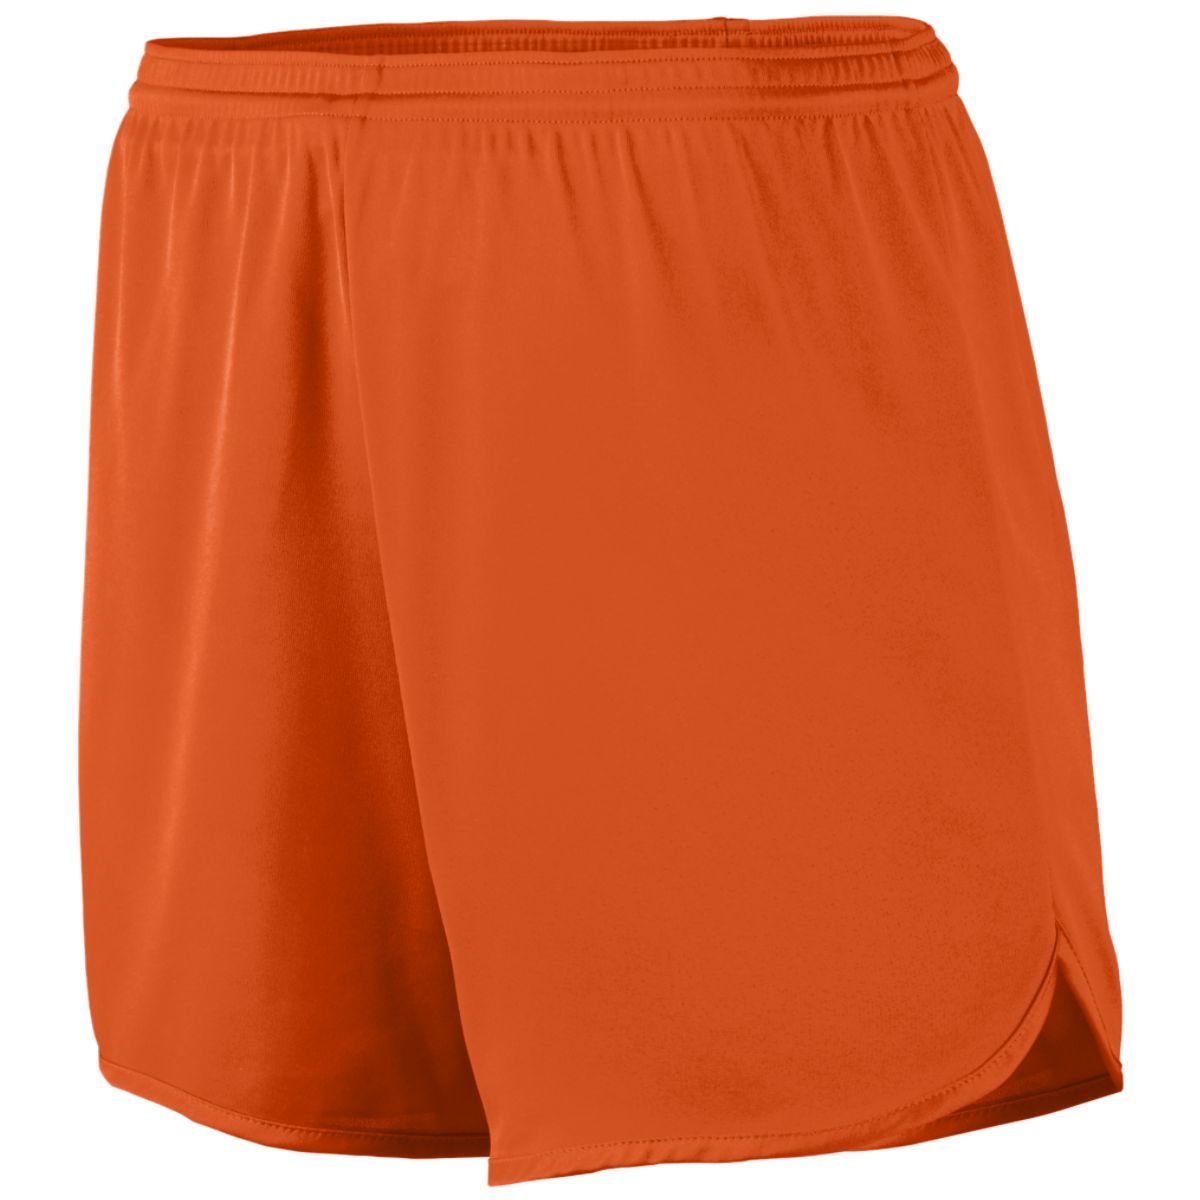 Augusta Sportswear Accelerate Shorts in Orange  -Part of the Adult, Adult-Shorts, Augusta-Products, Track-Field product lines at KanaleyCreations.com